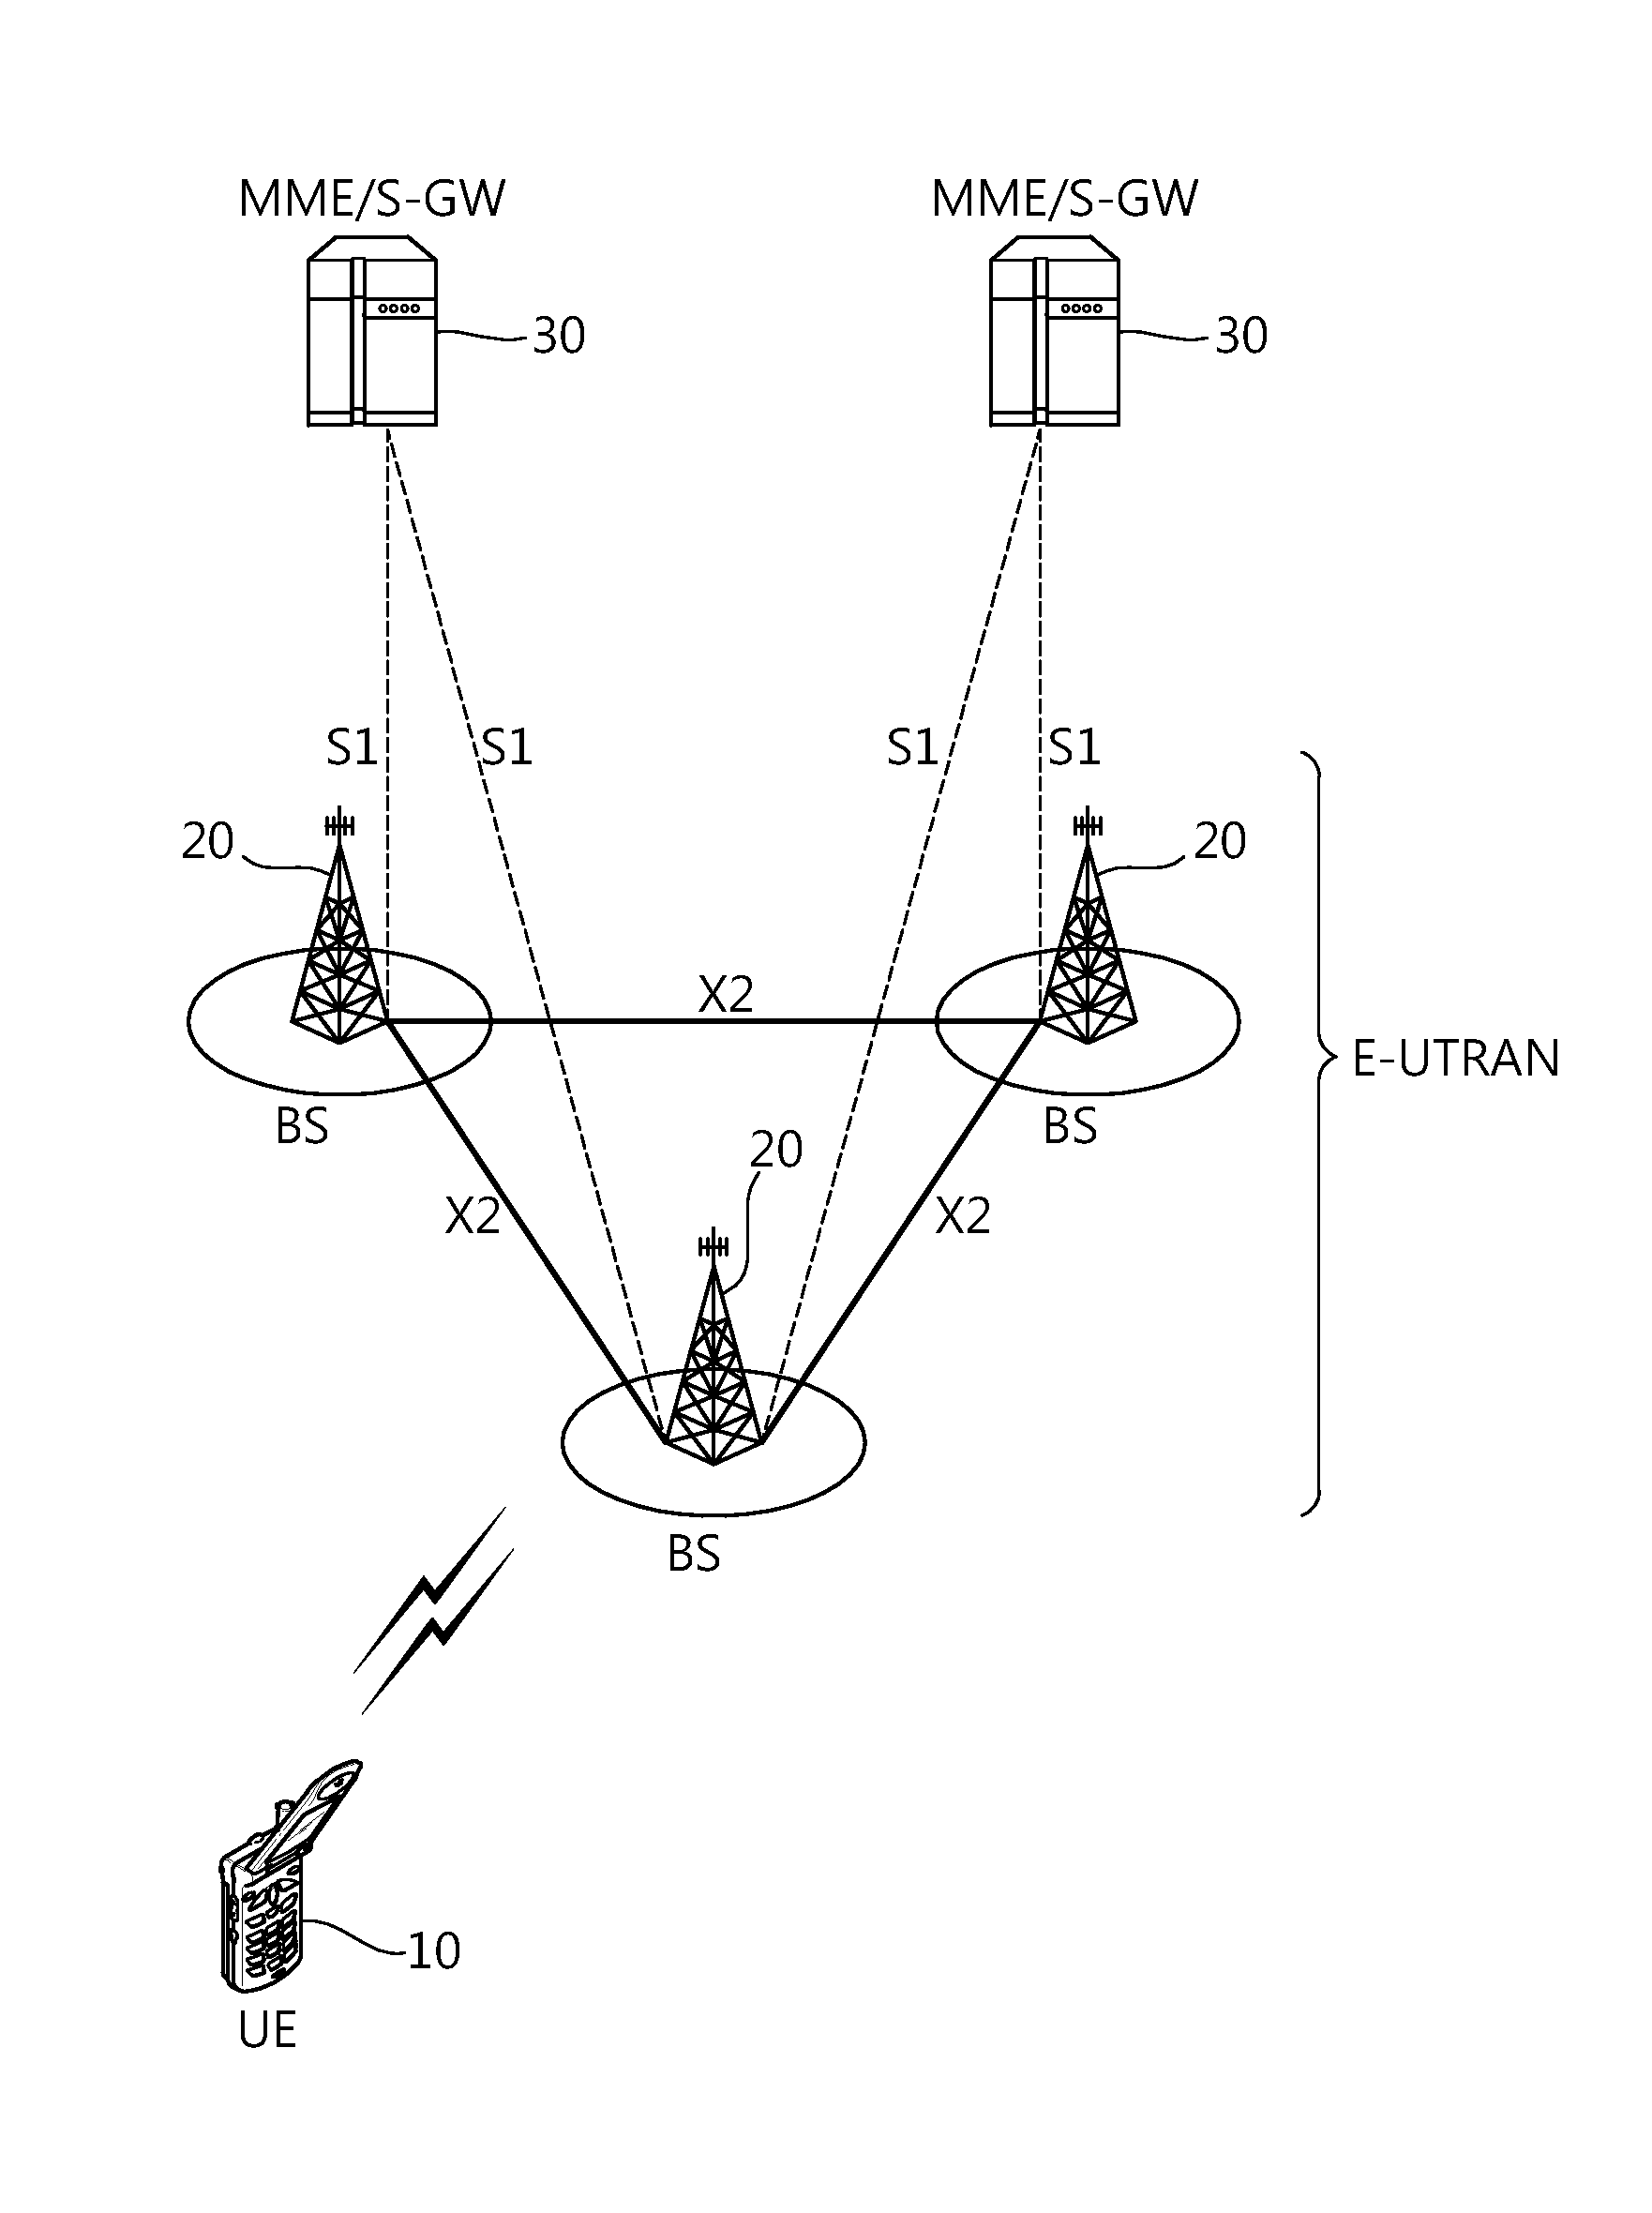 Method and apparatus for fdd/tdd intra-node and inter-node carrier aggregation